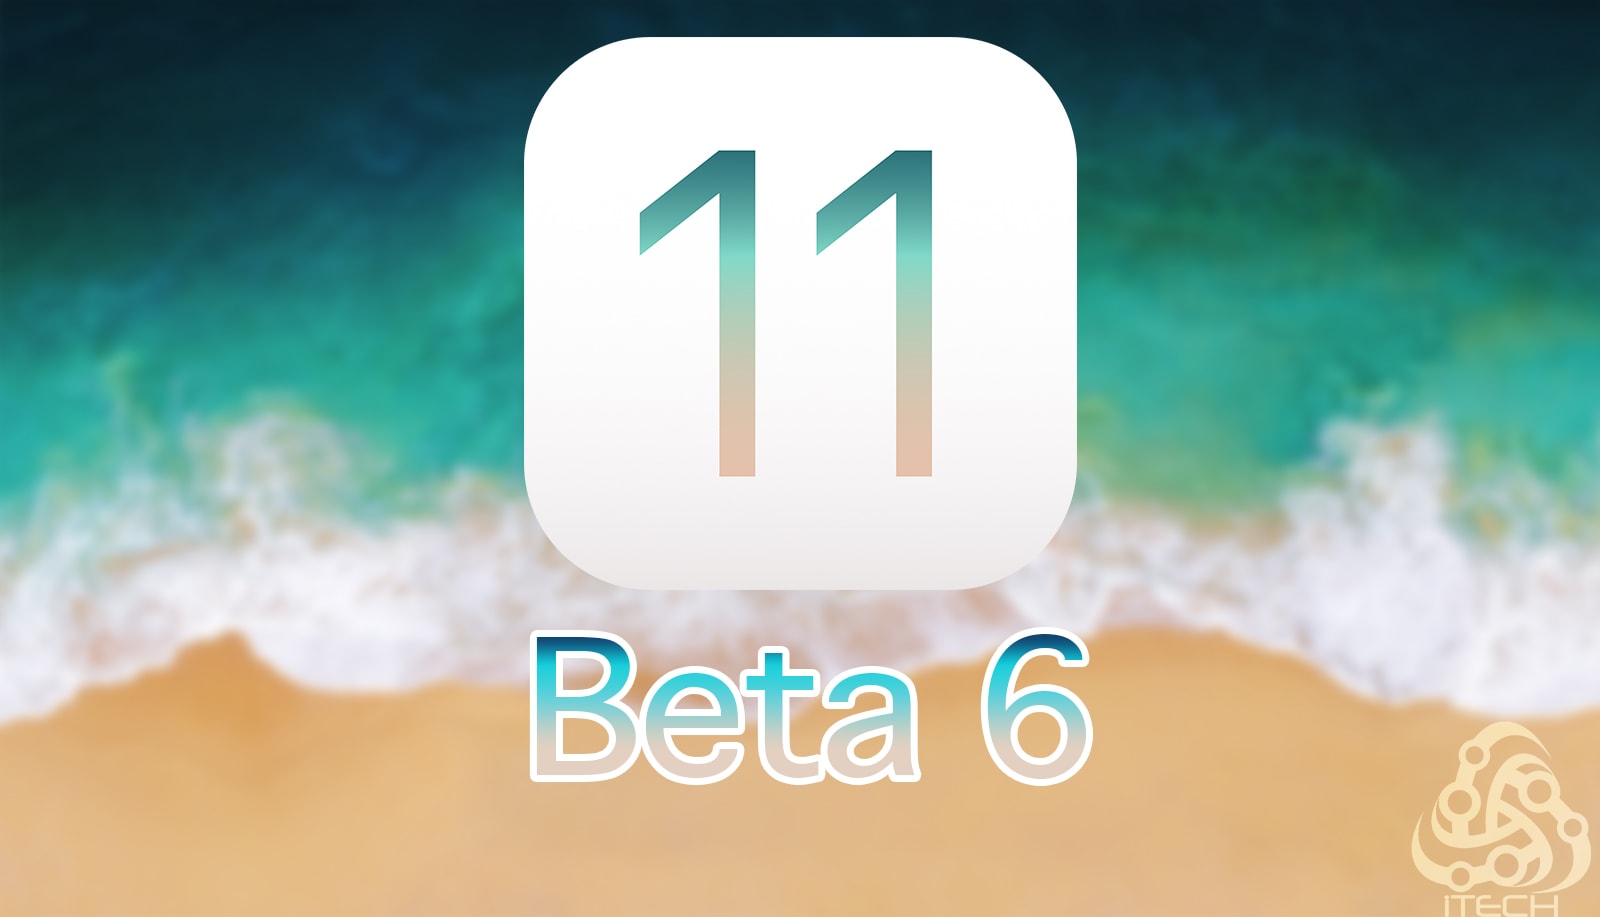  iOS 11 beta 6 released with new changes